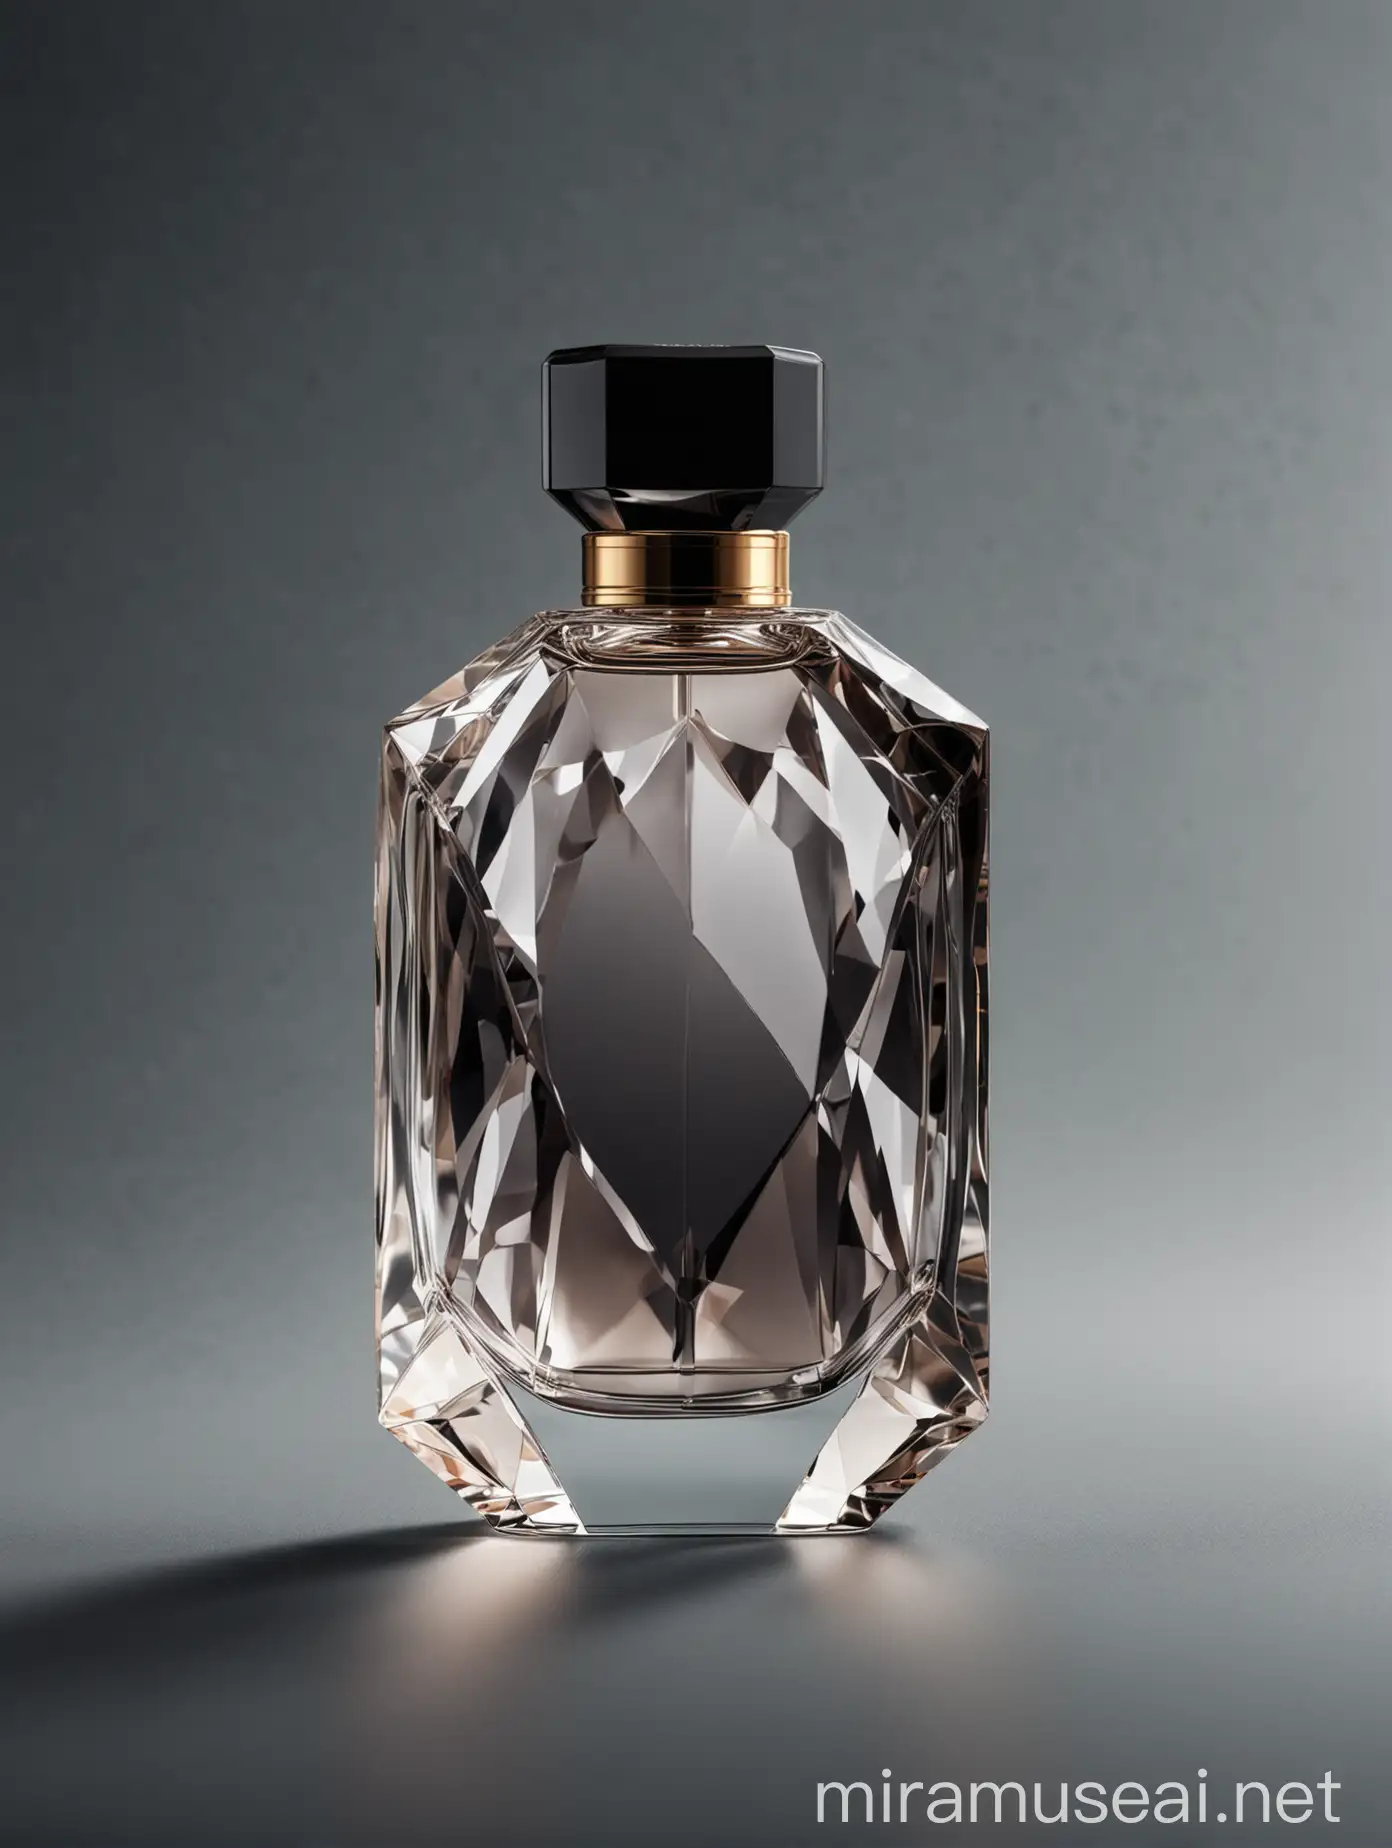 The Image Shows one Men's perfume bottle. The Perfume bottle is set against an isolated background. It is the perfect Perfume bottle with a symmetrical, geometric and beautiful shape.